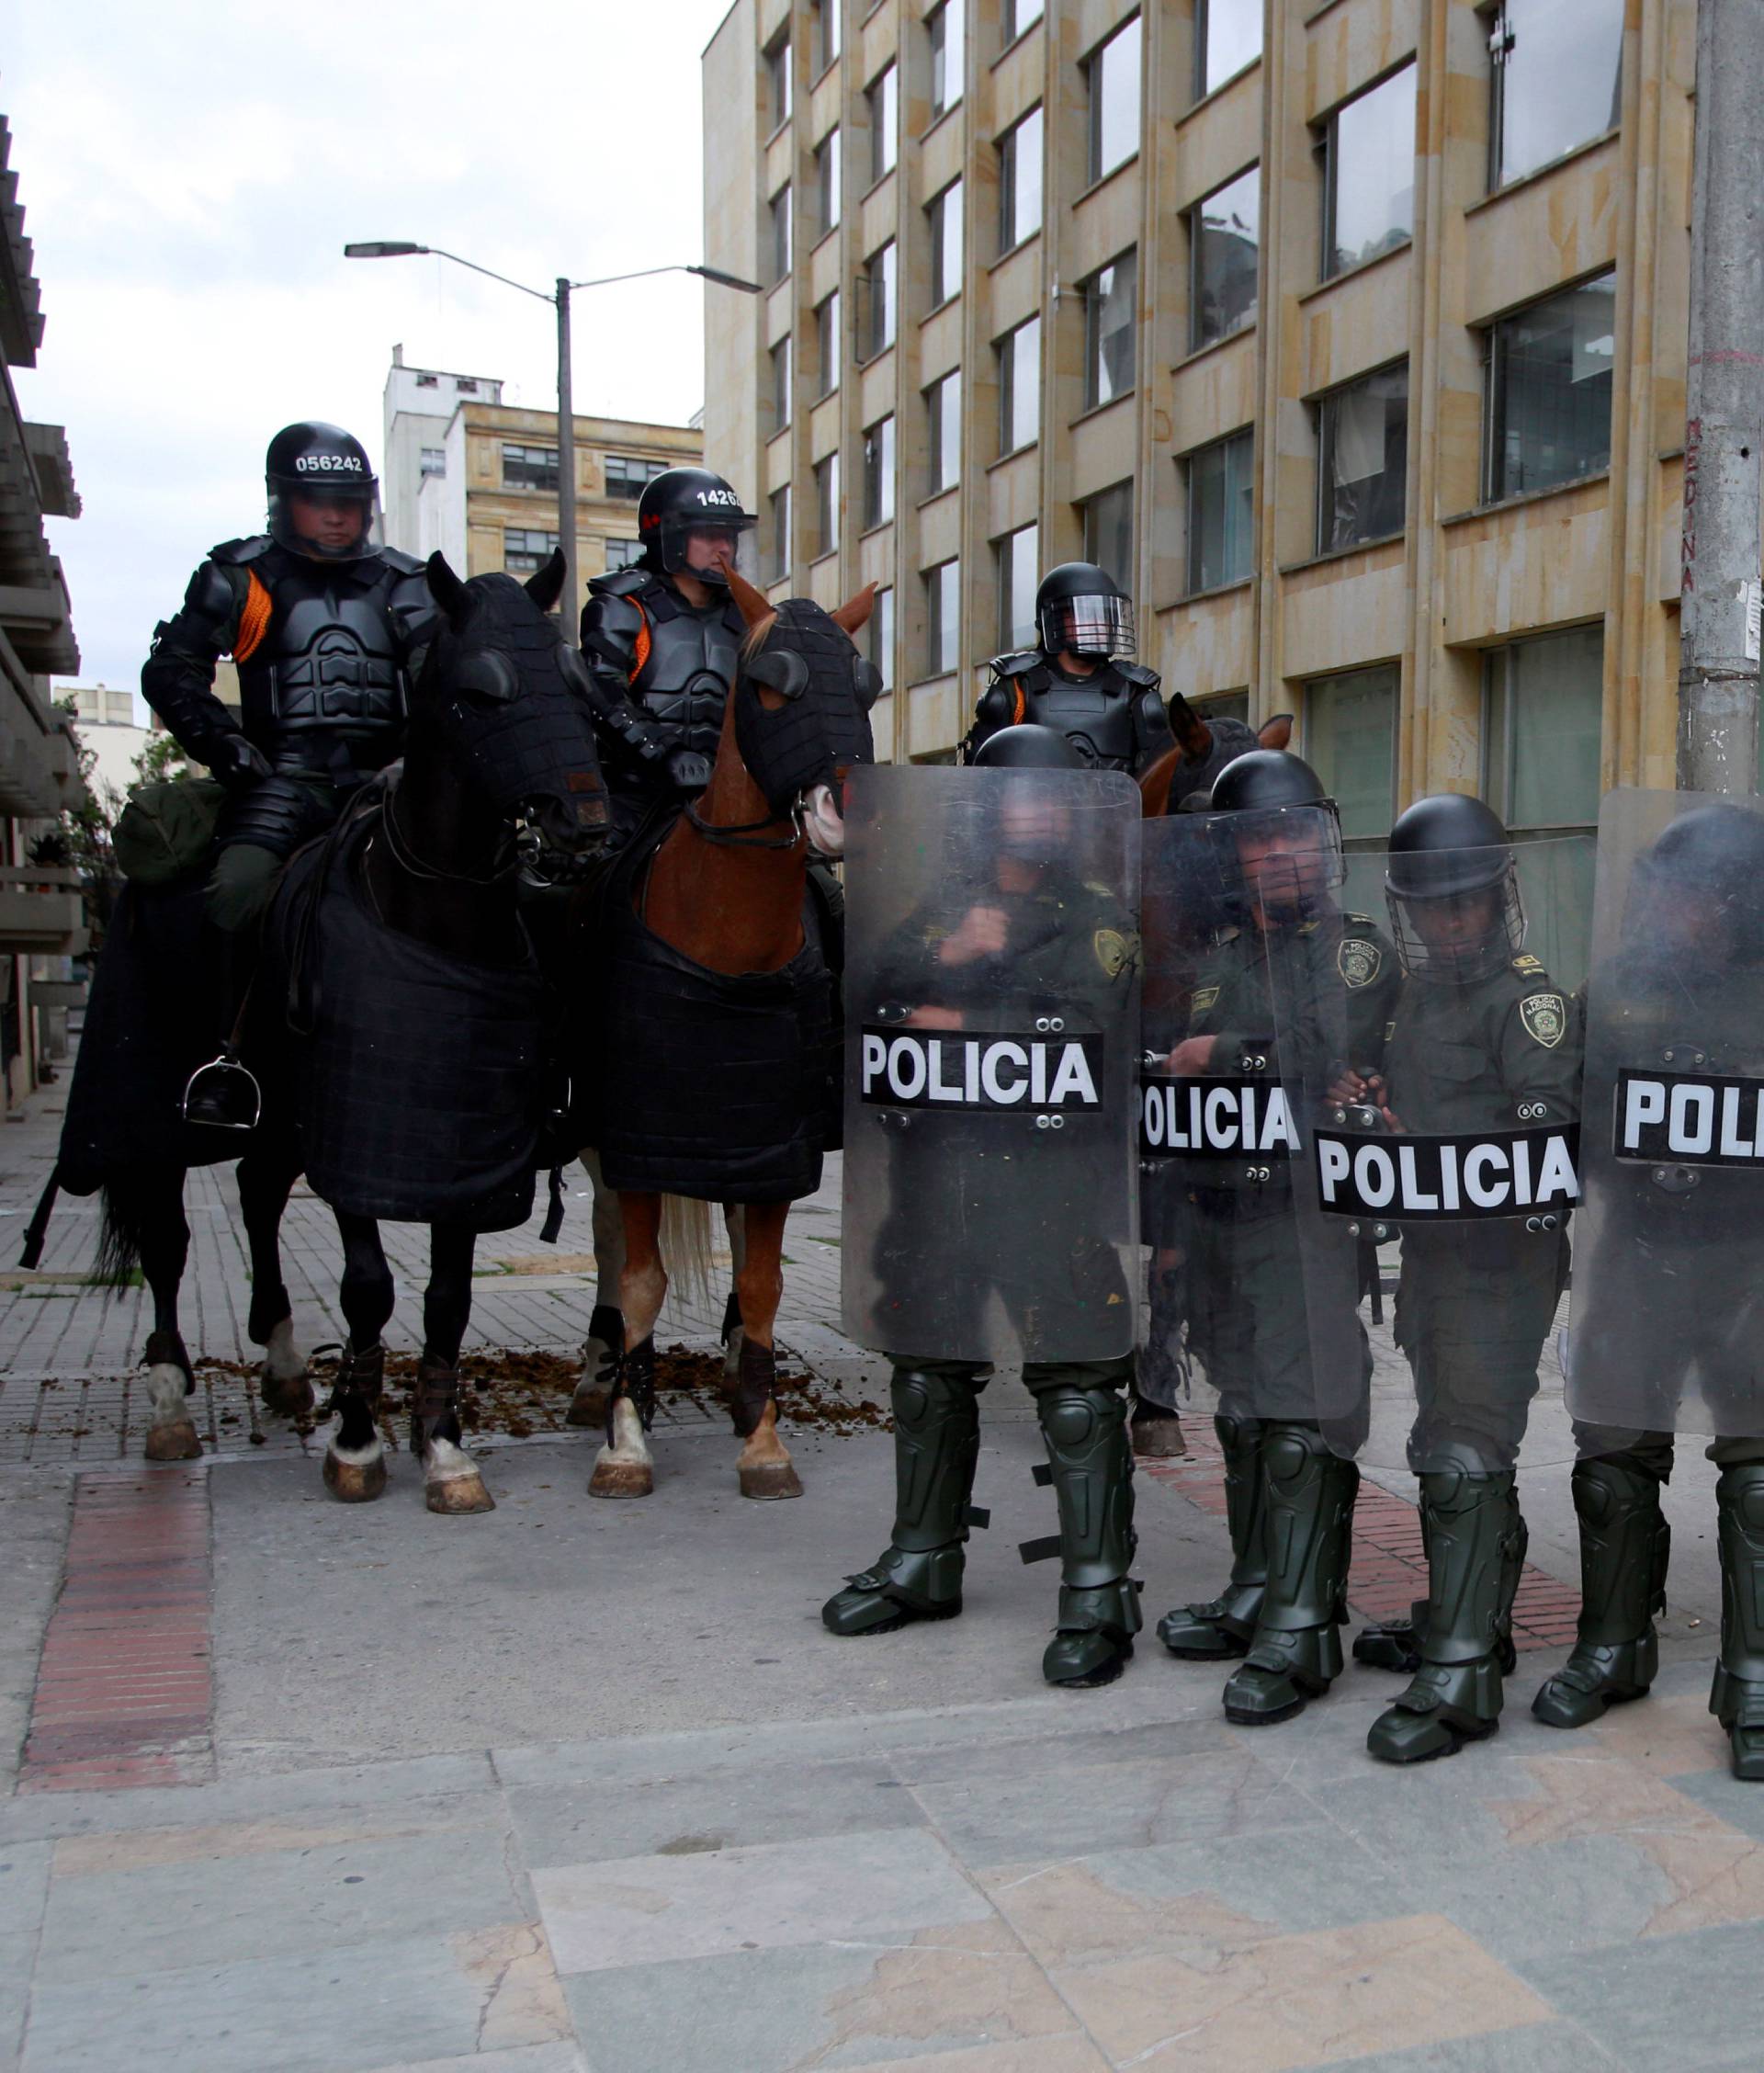 Riot policemen stand during May Day protests in Bogota, Colombia